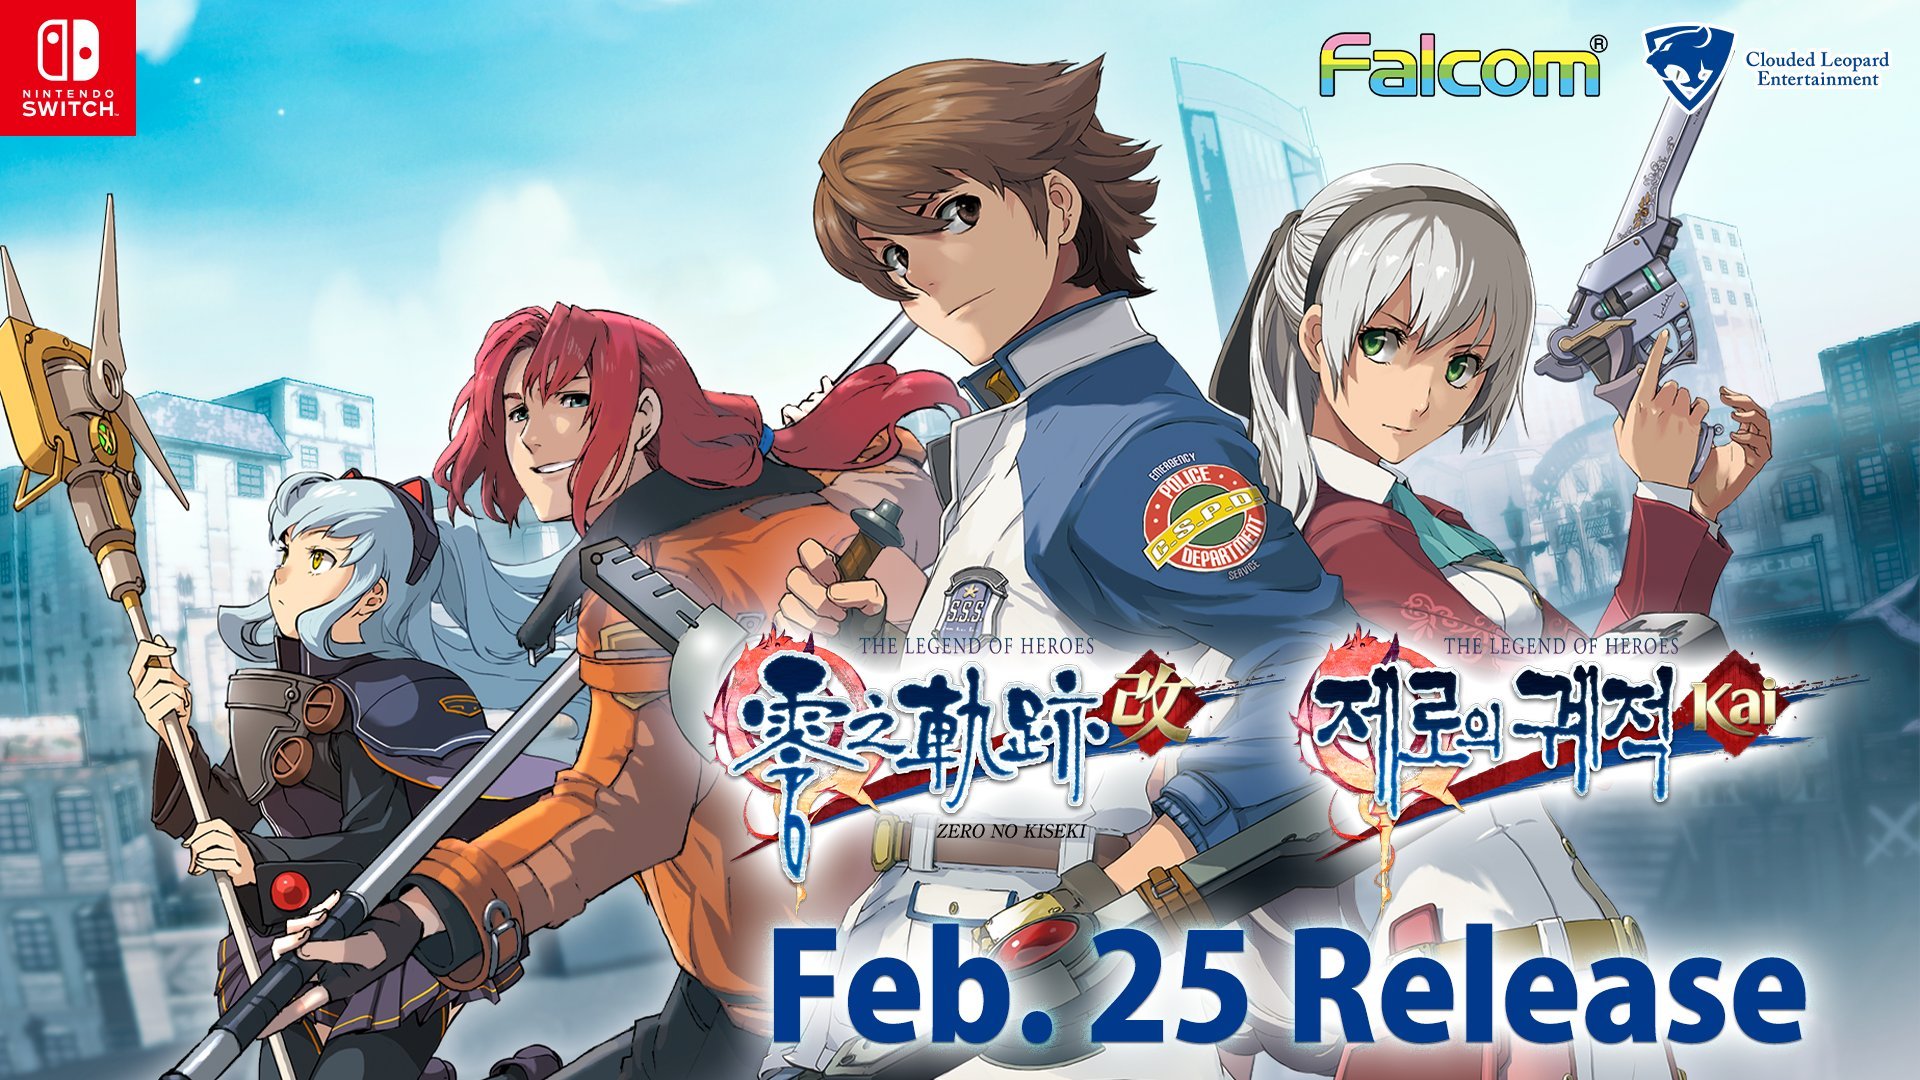 The Legend of Heroes: Zero no Kiseki for Switch has been delayed until February 25 in Asia